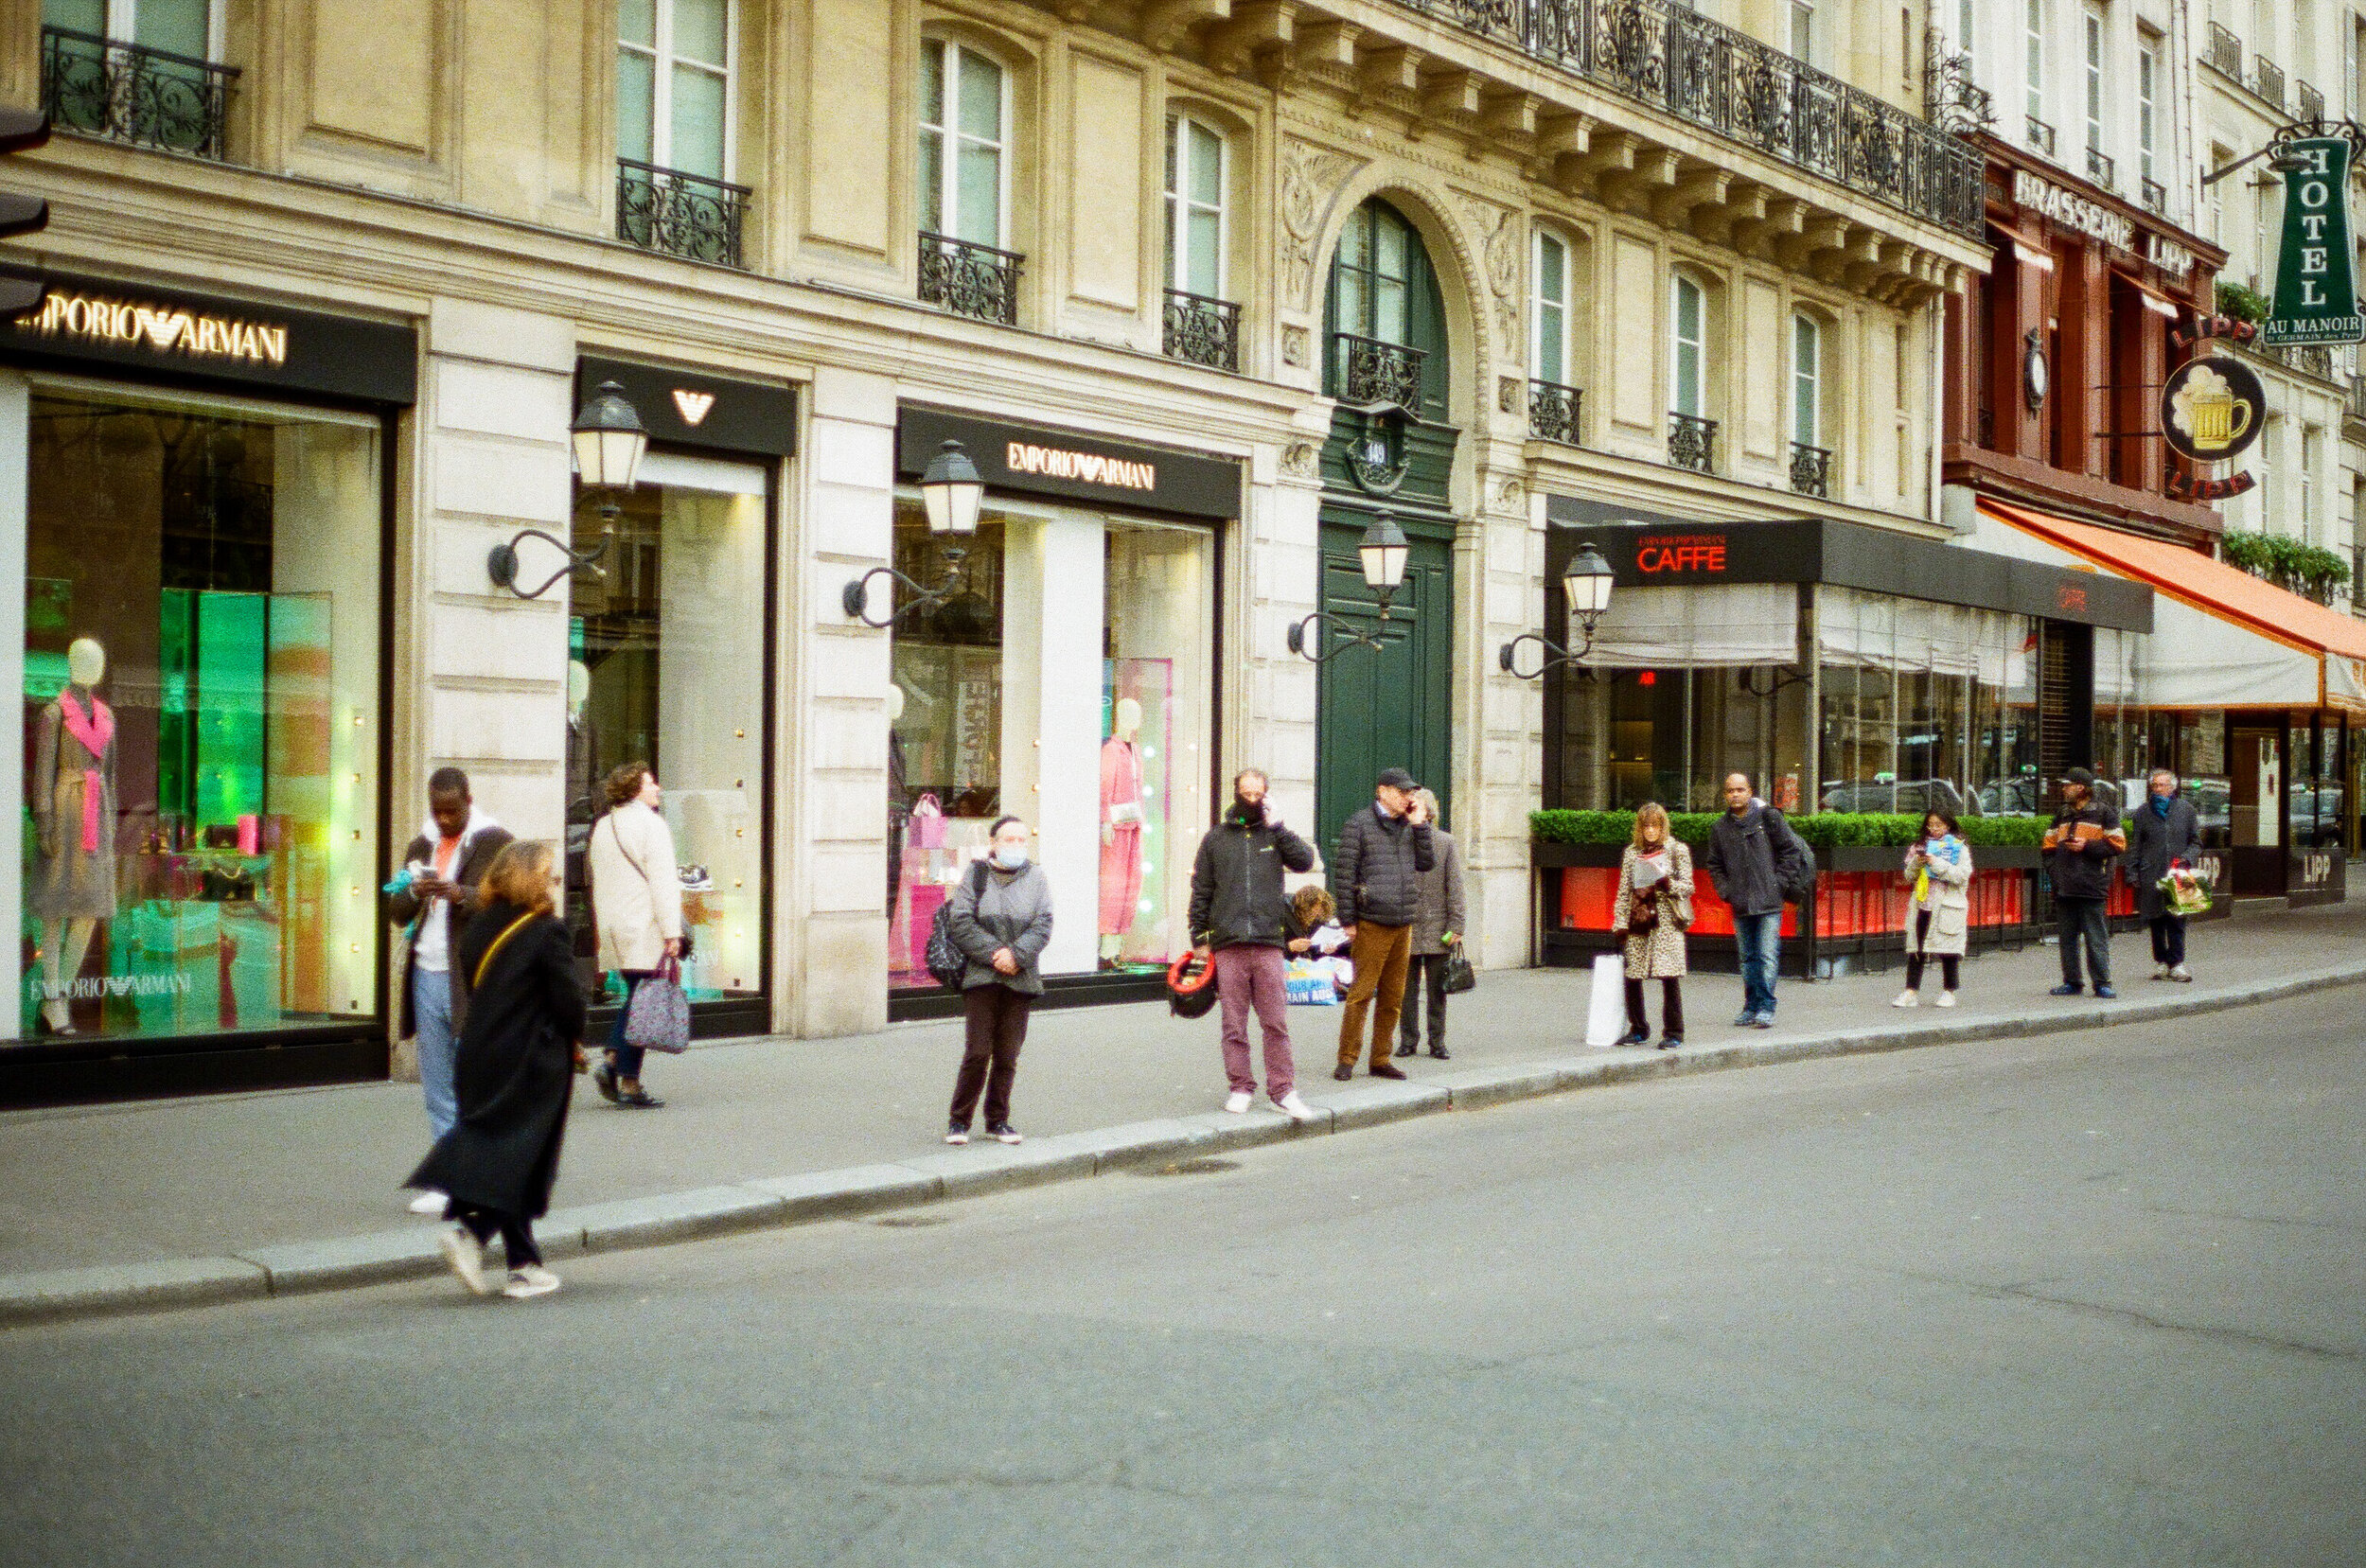   The end of the line for Monoprix, a large grocery store in the 6th Arrondissement.  